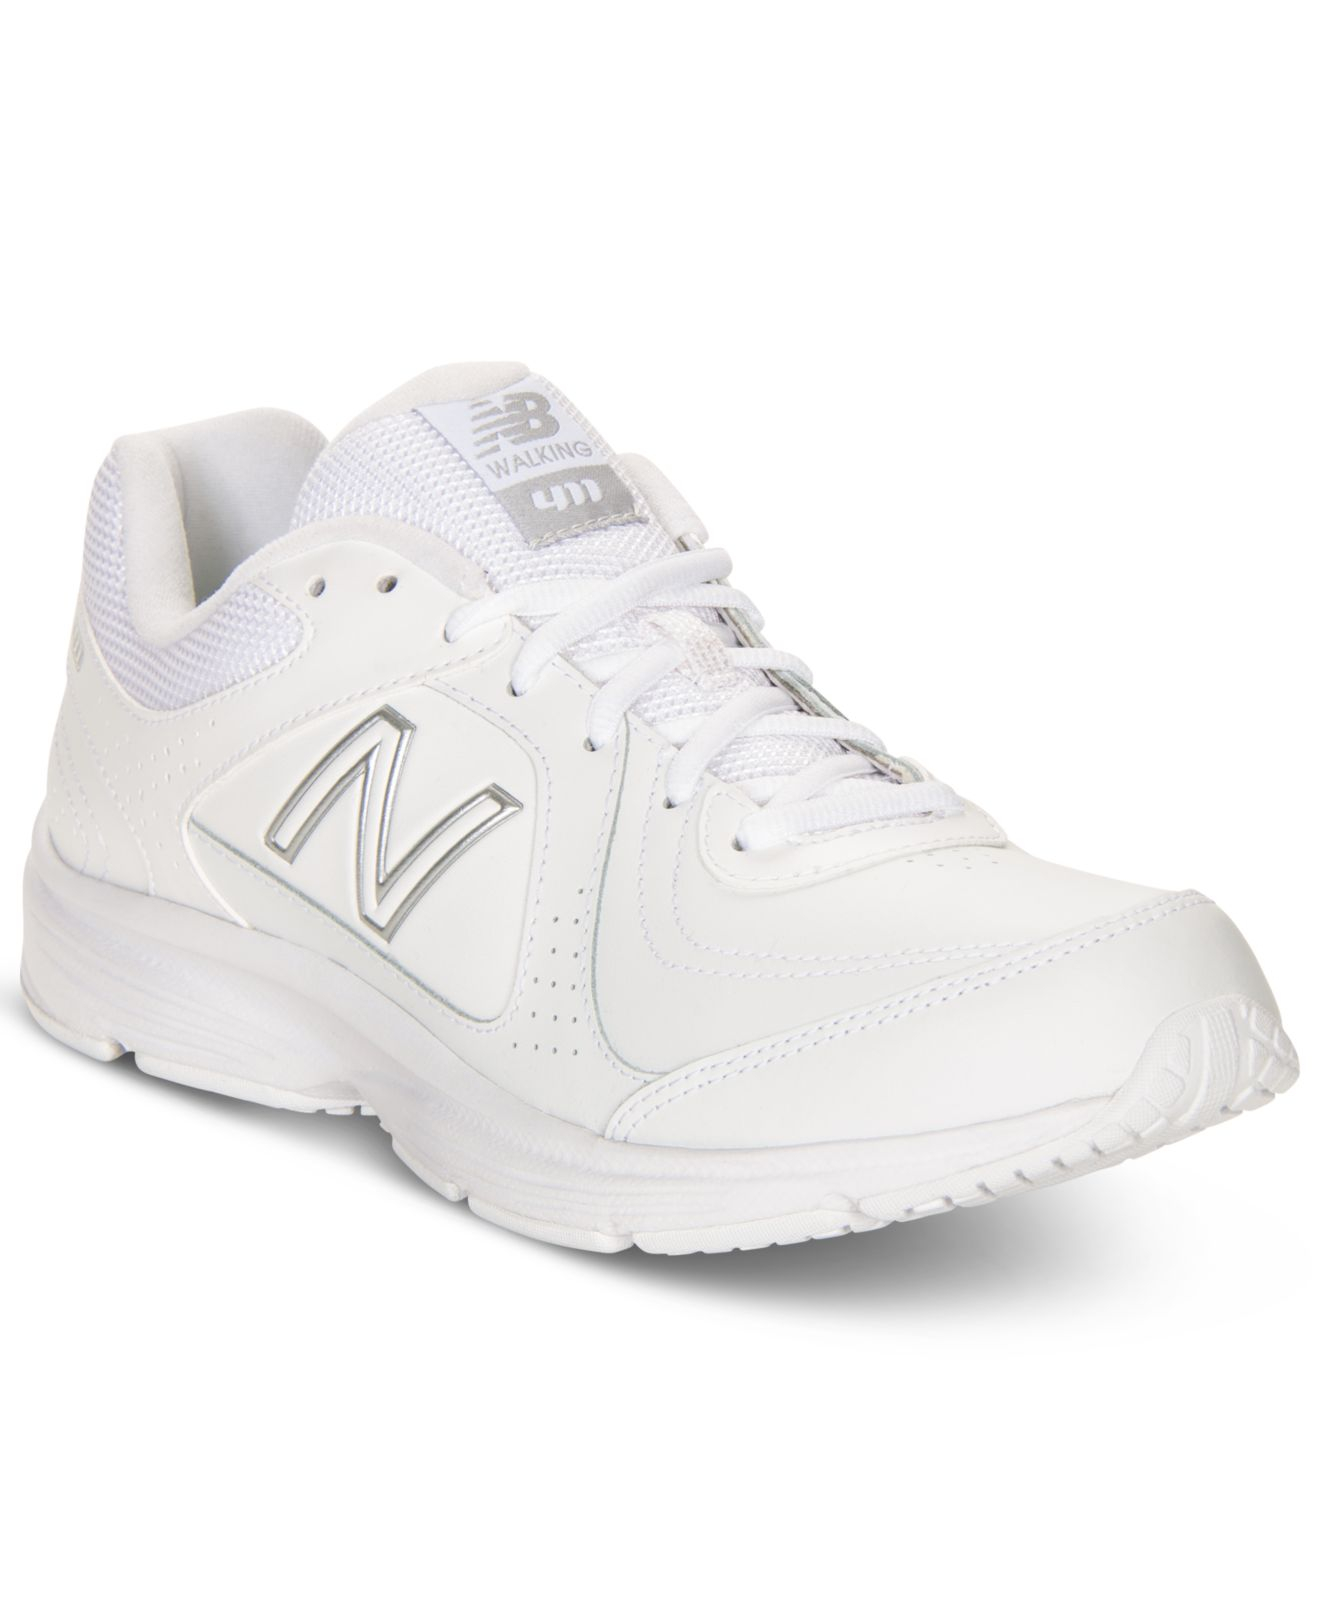 Lyst - New Balance Men'S 411 Walking Sneakers From Finish Line in White ...